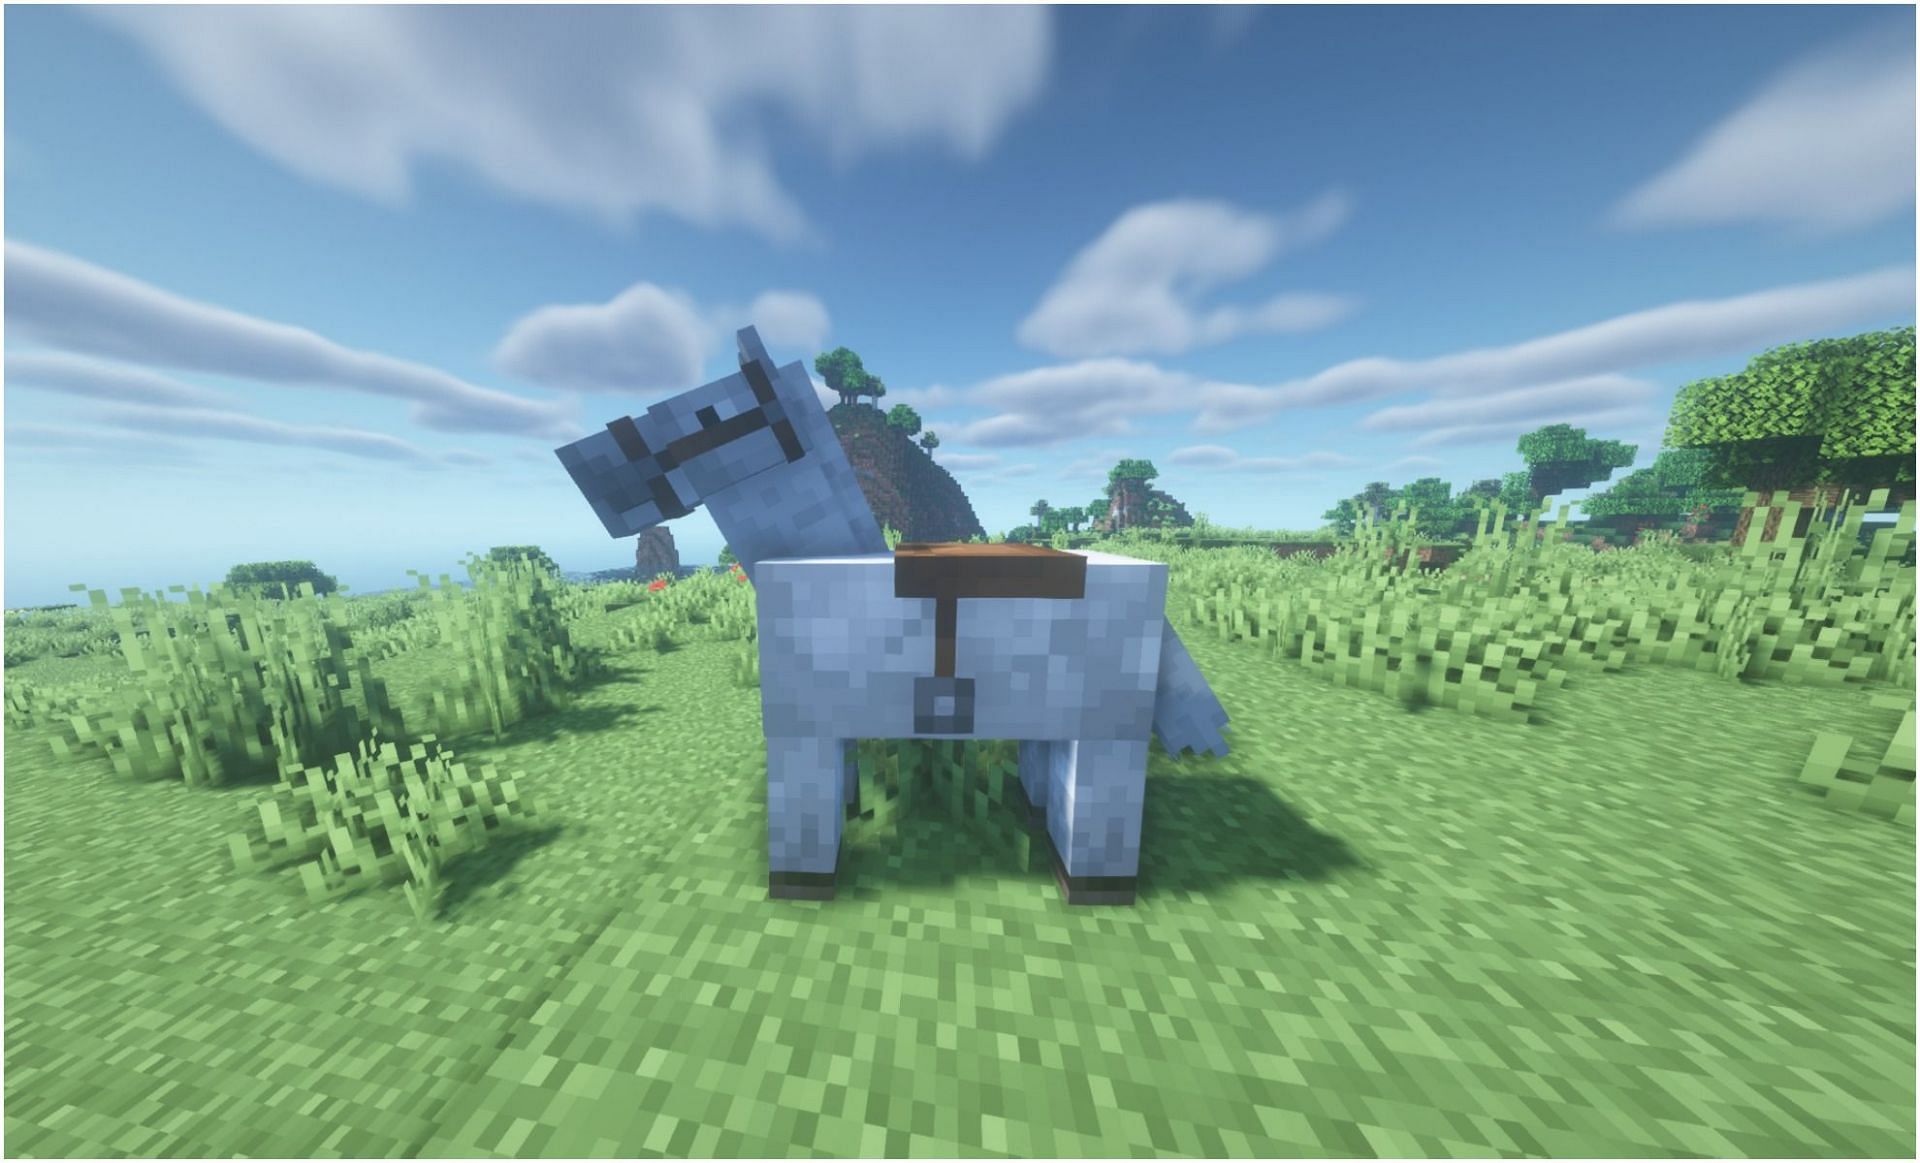 Saddles are most commonly used on horses (Image via Minecraft)